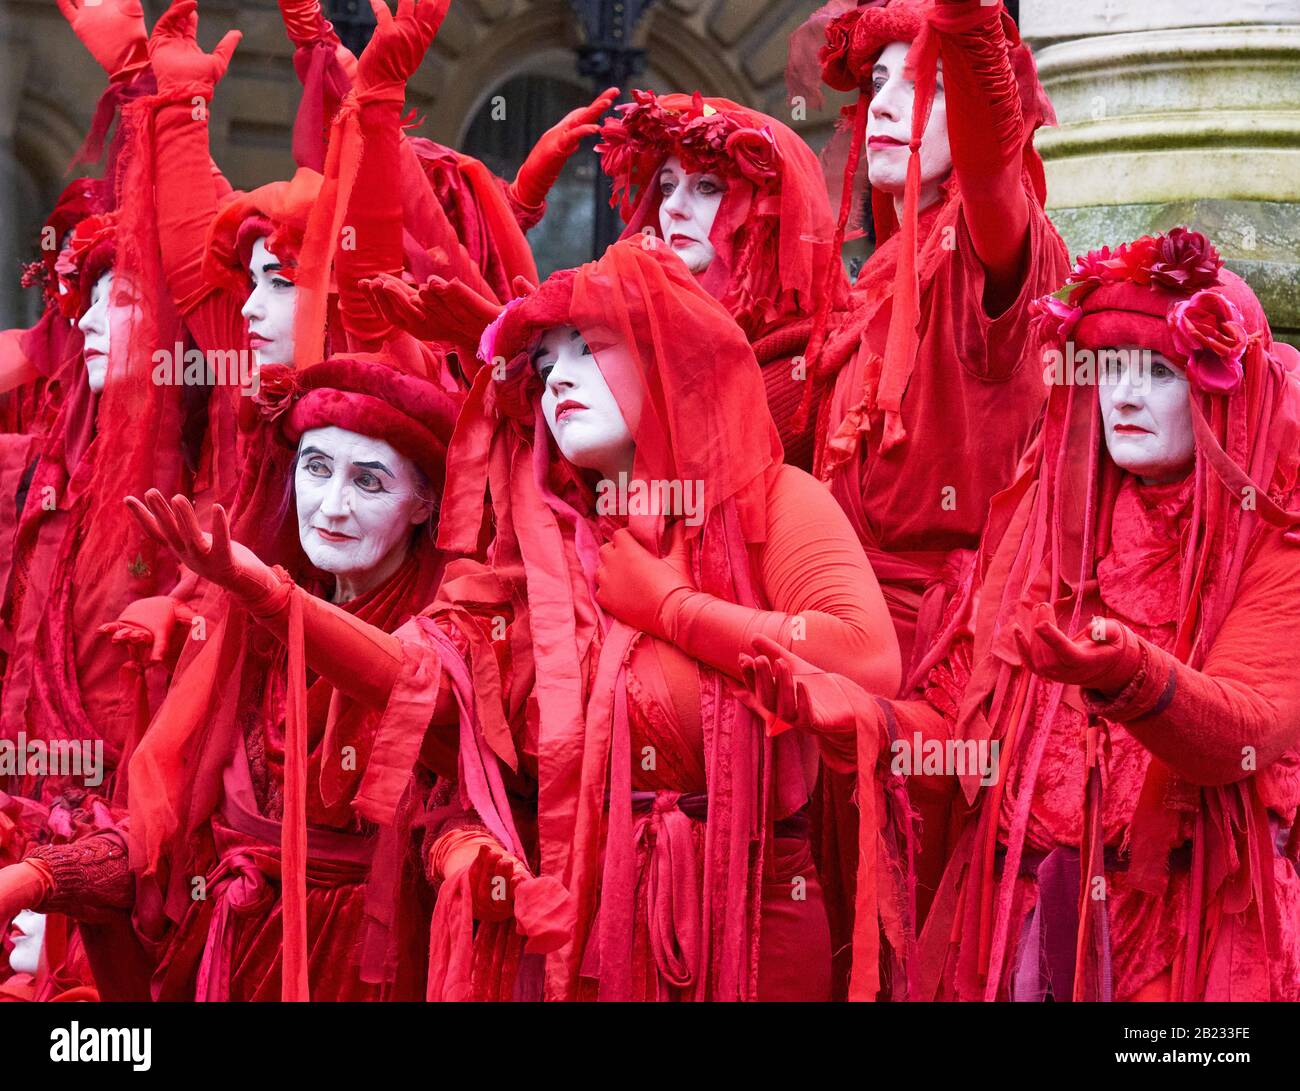 The Red Brigade of Extinction Rebellion displaying their striking poses in peaceful protest supporting action on climate change - Bristol UK Stock Photo